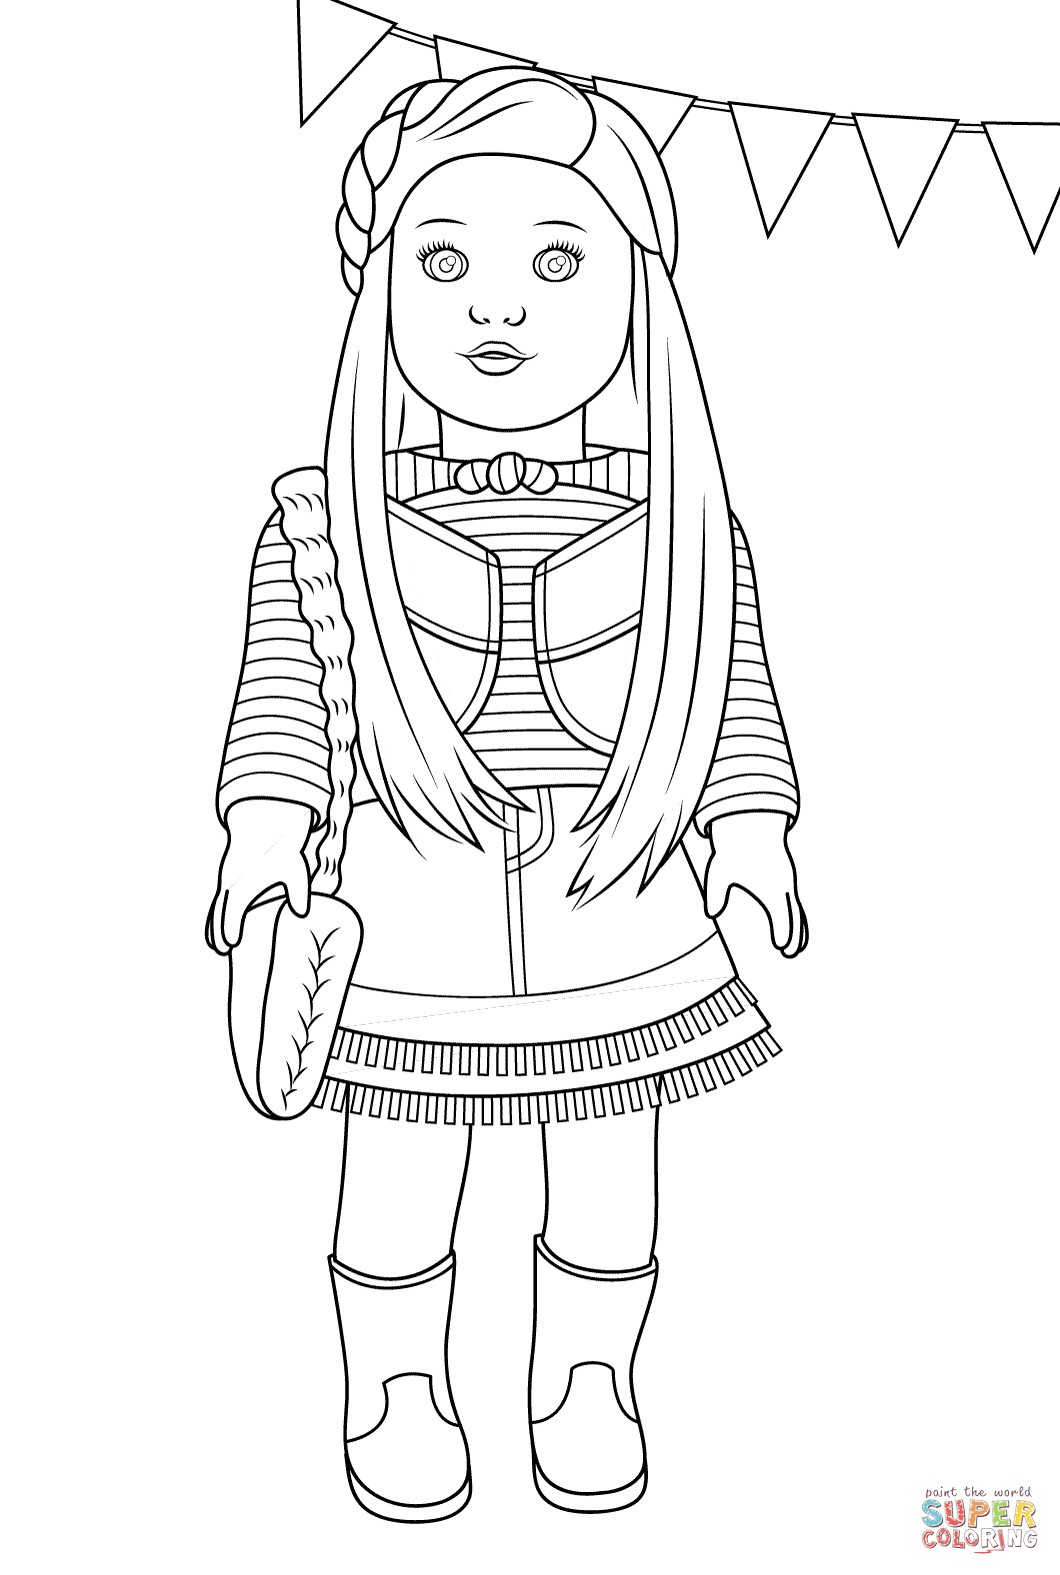 New American Girl Coloring Pages 23 In Free Coloring Book with American Girl Coloring Pages